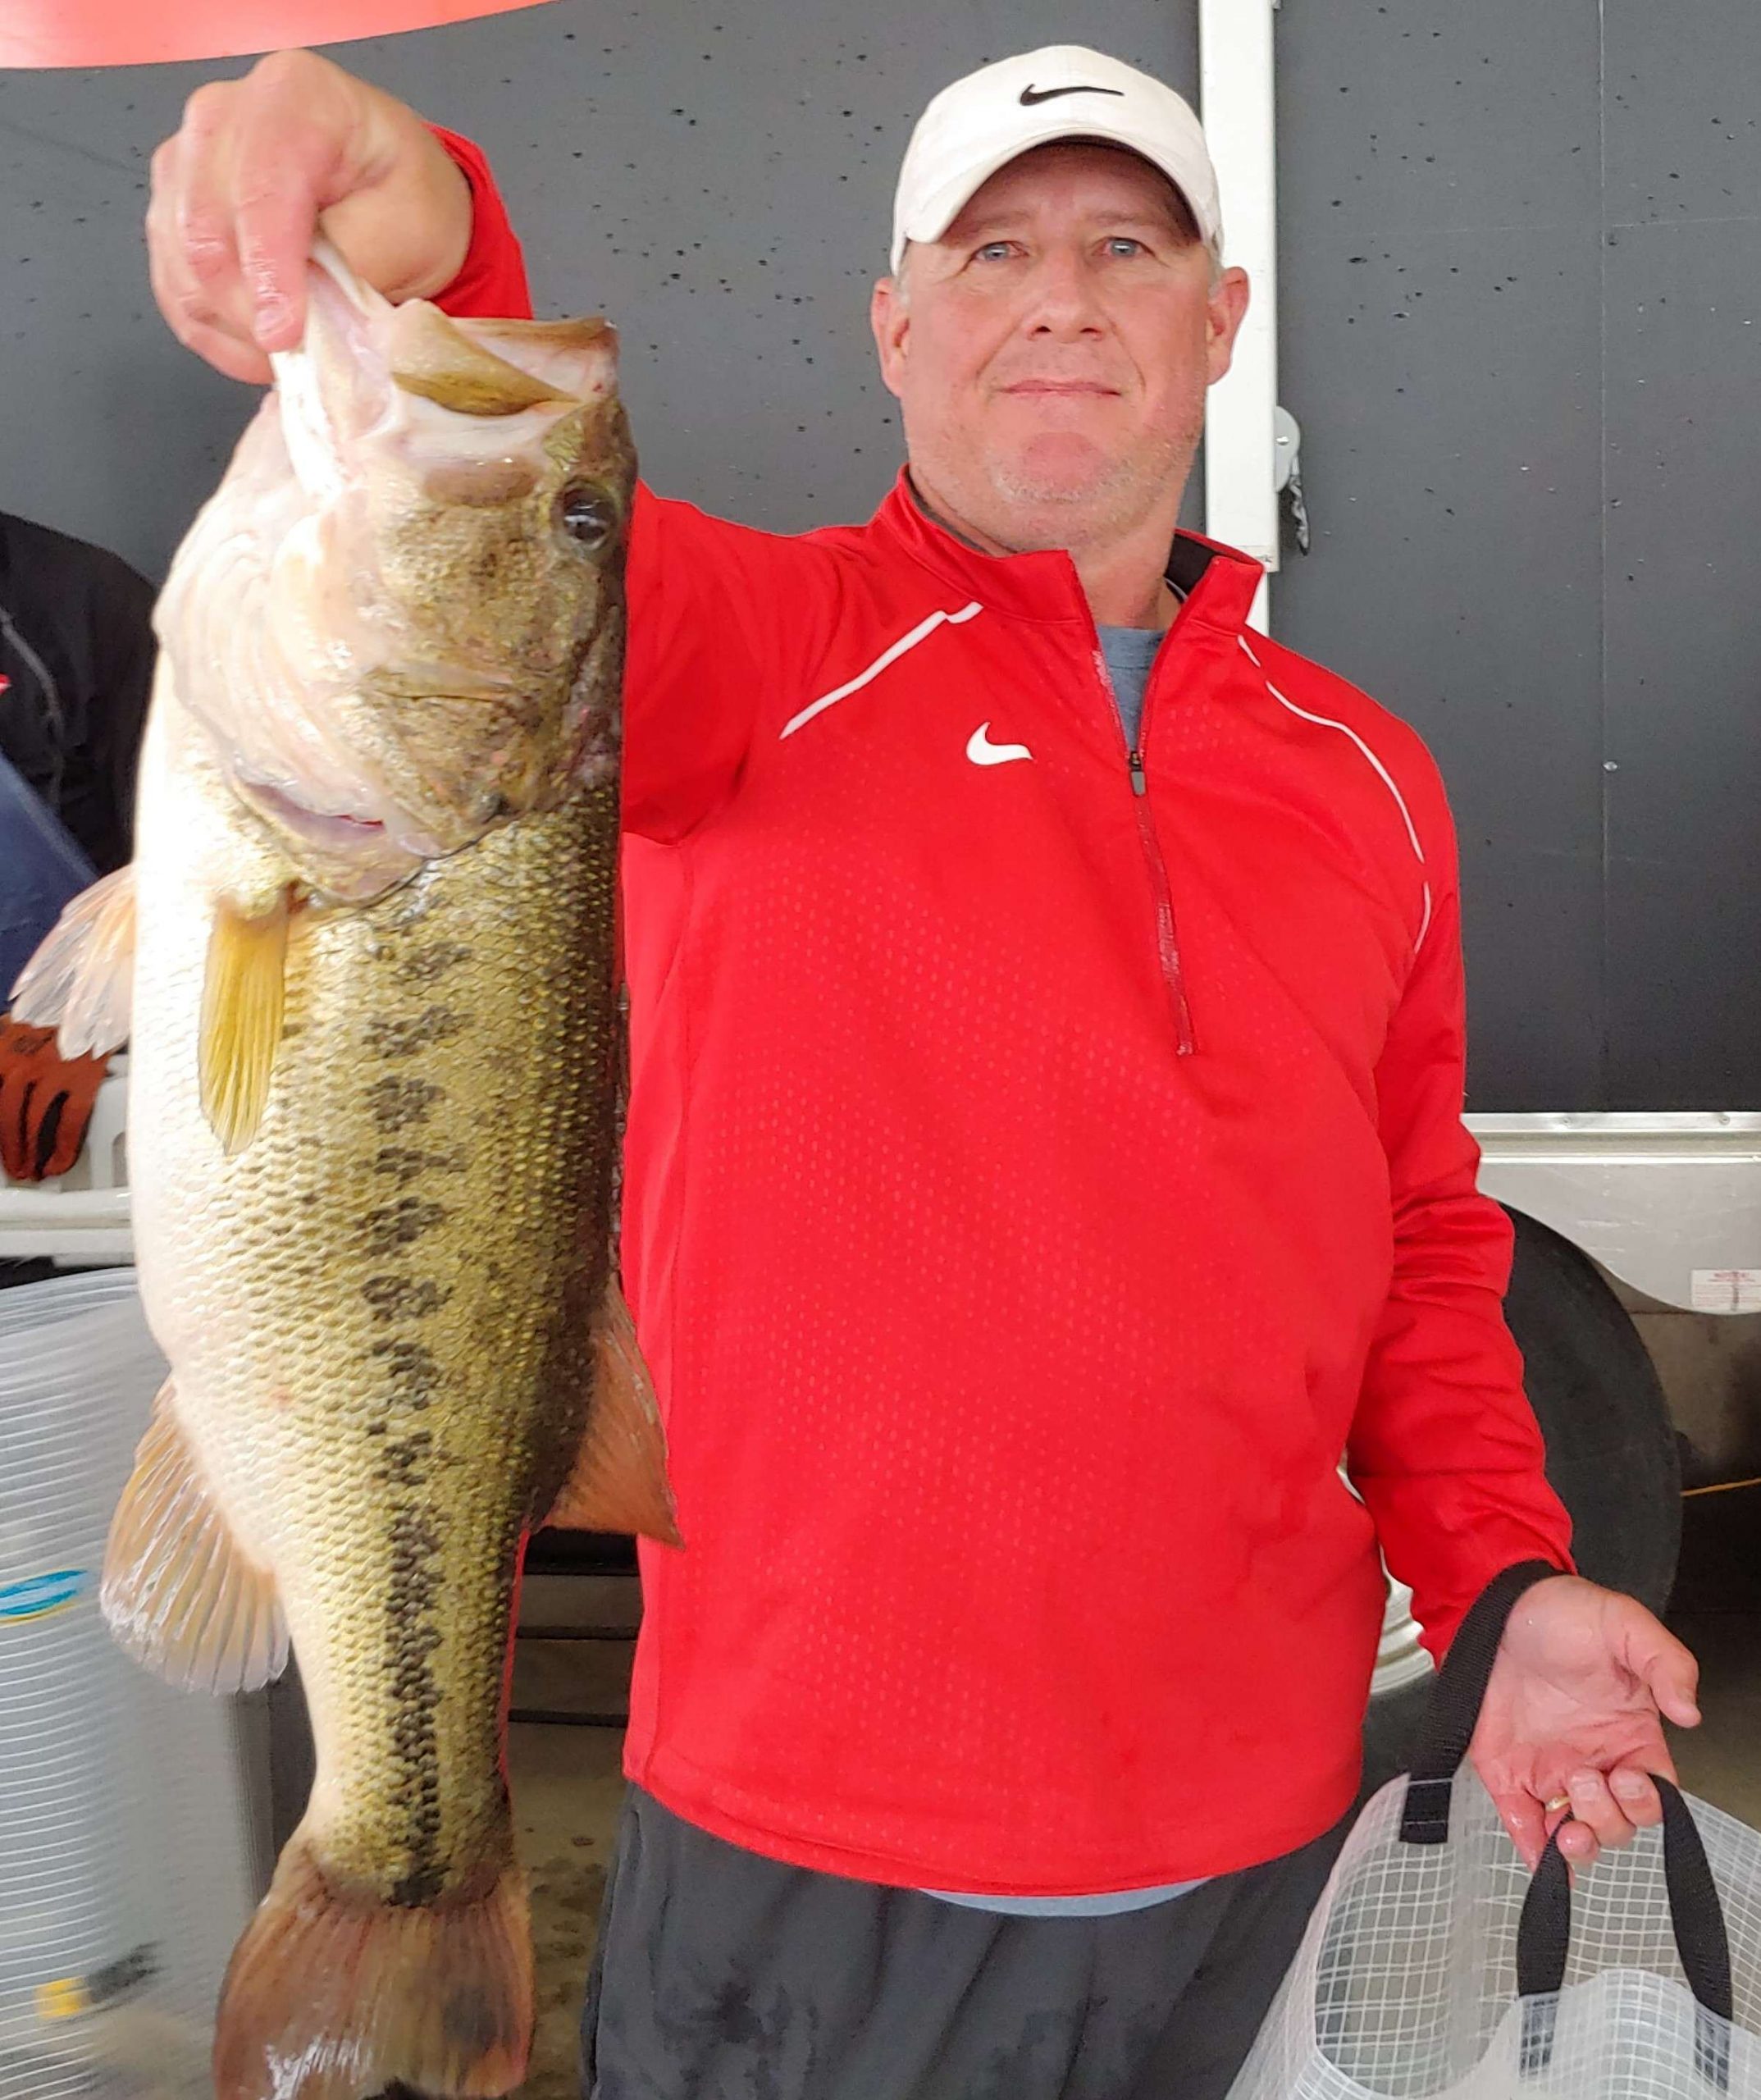 Michael Wells Remembered as Nice Guy in Hometown, Fishing